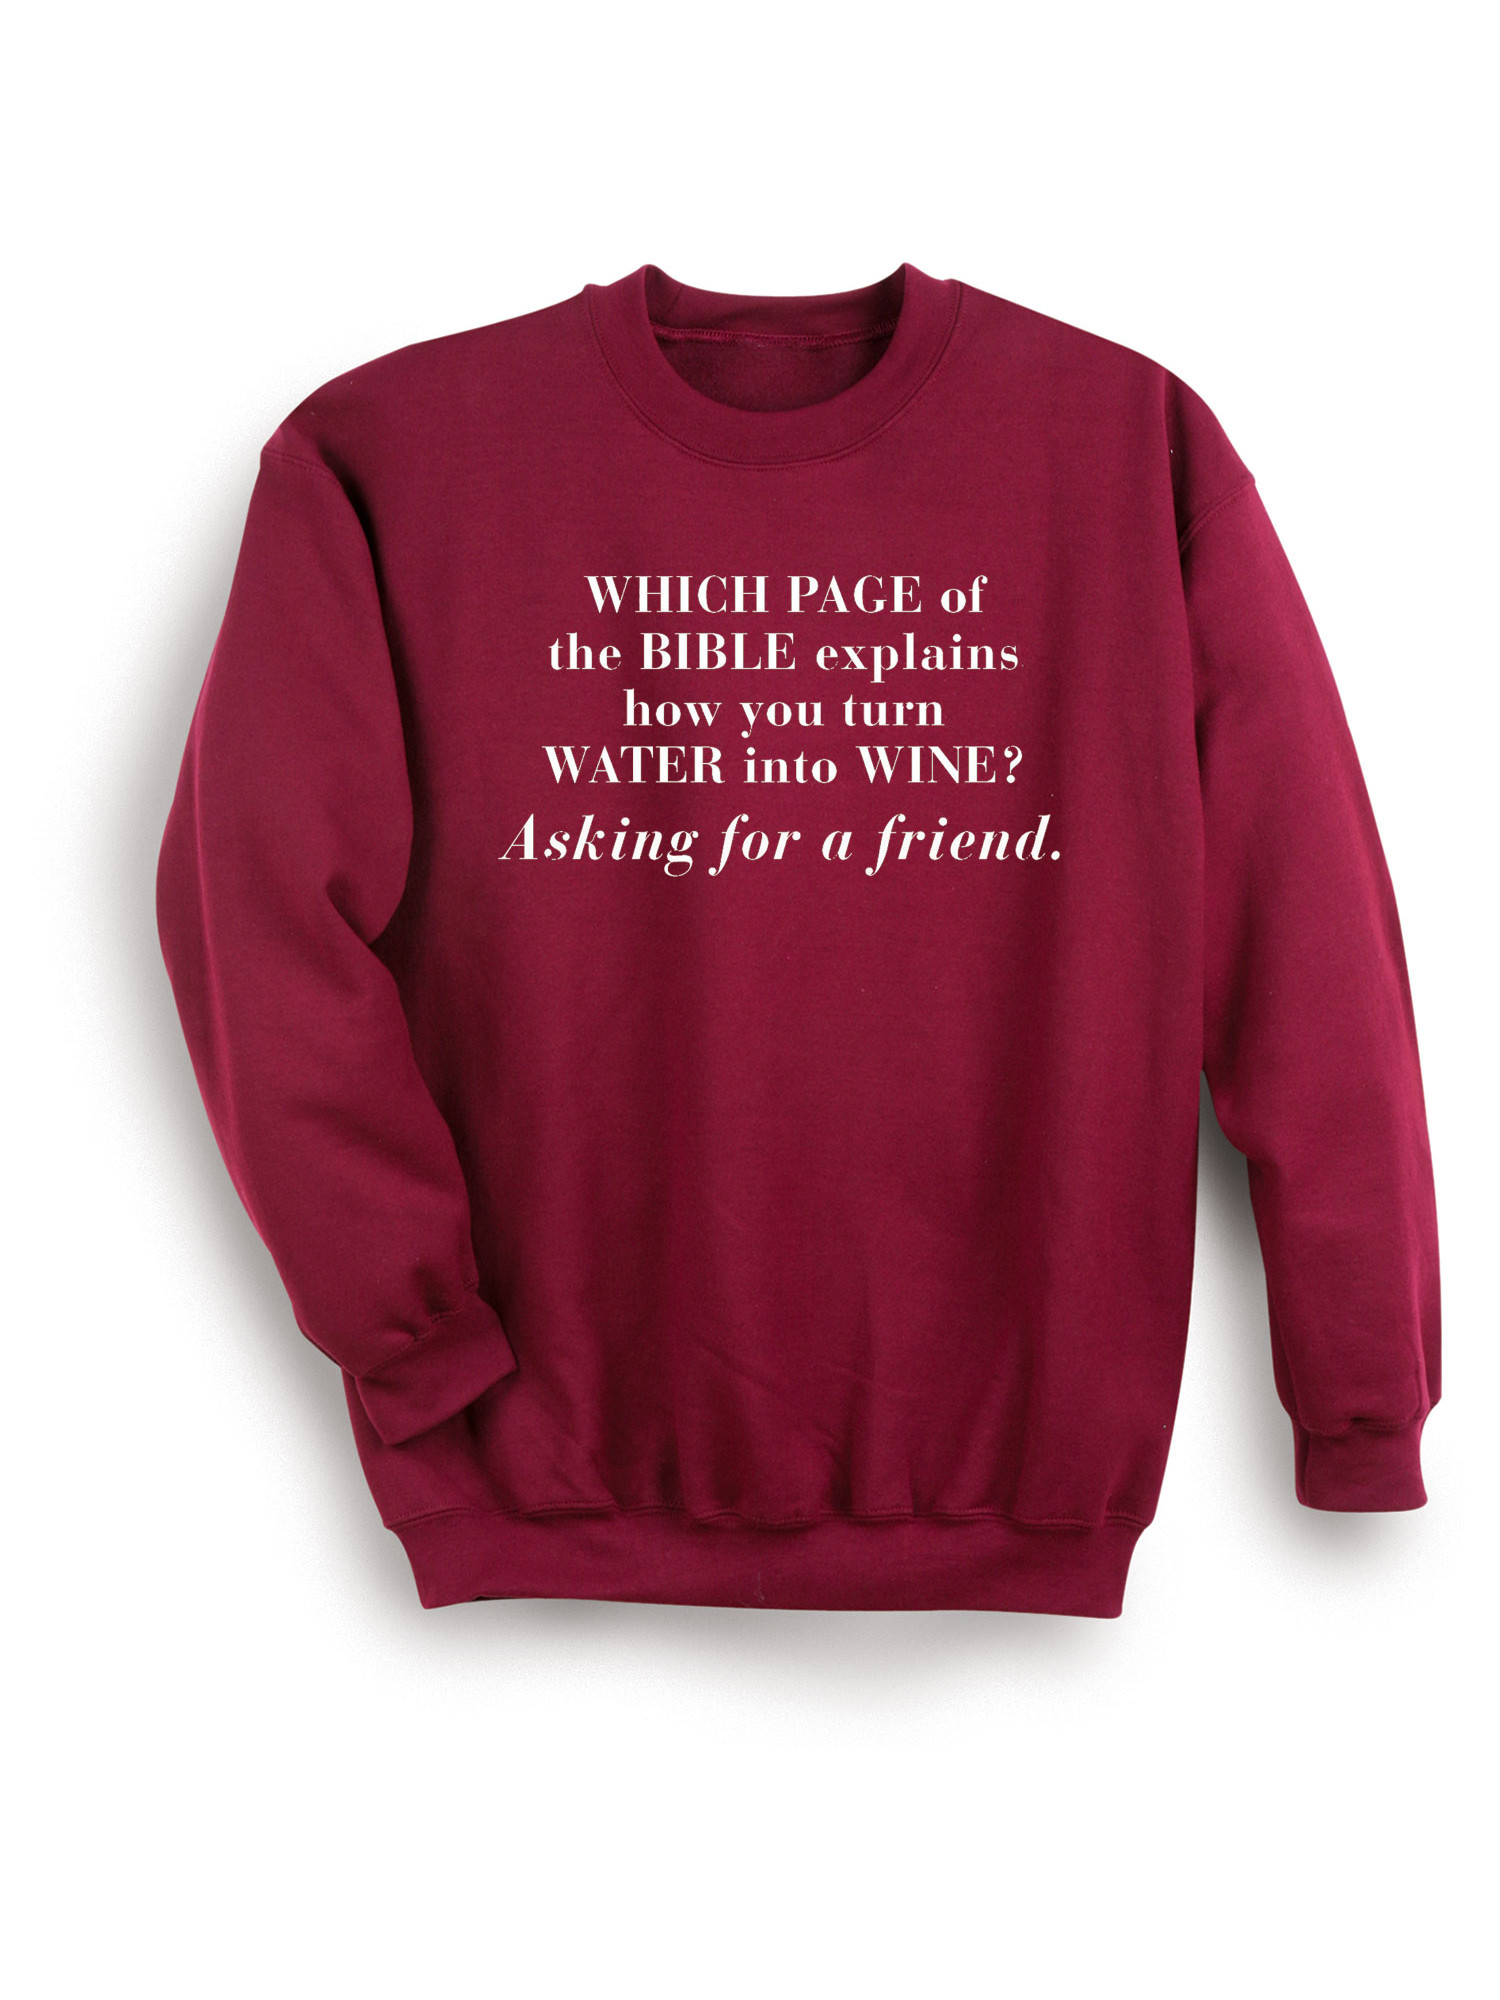 Product image for Water into Wine T-Shirt or Sweatshirt